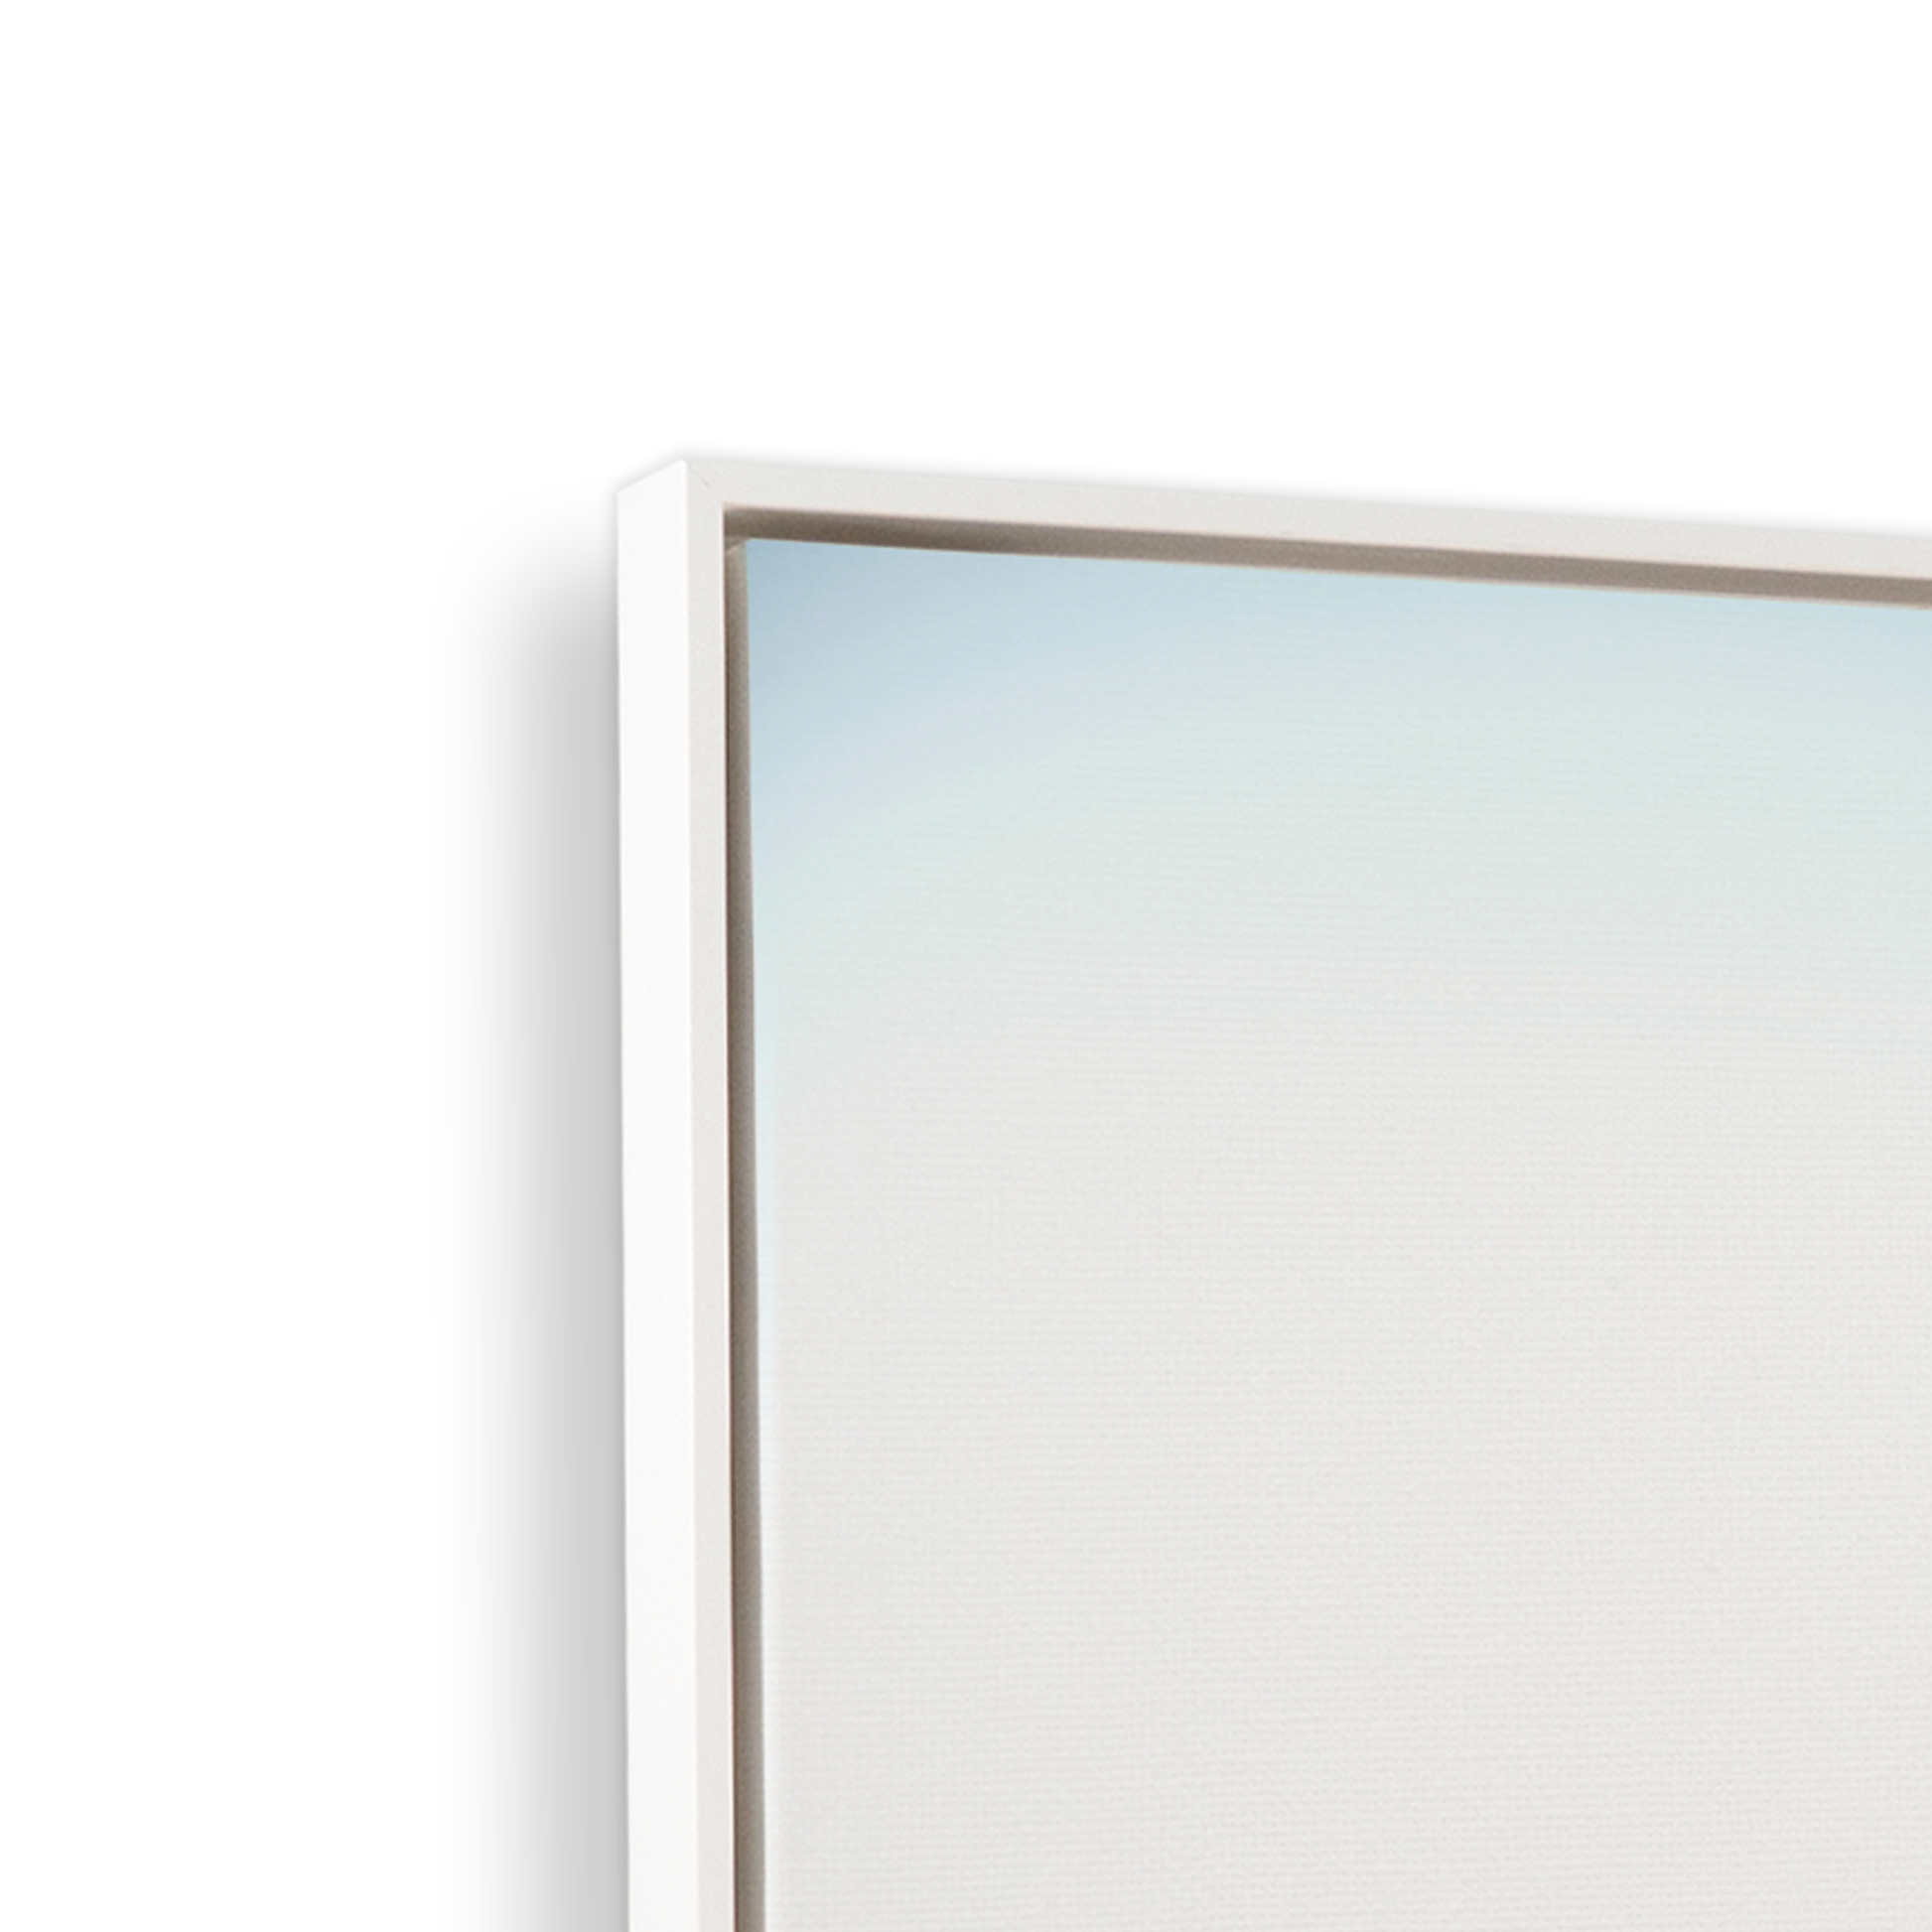 [color:Satin White], Picture of corner of frame